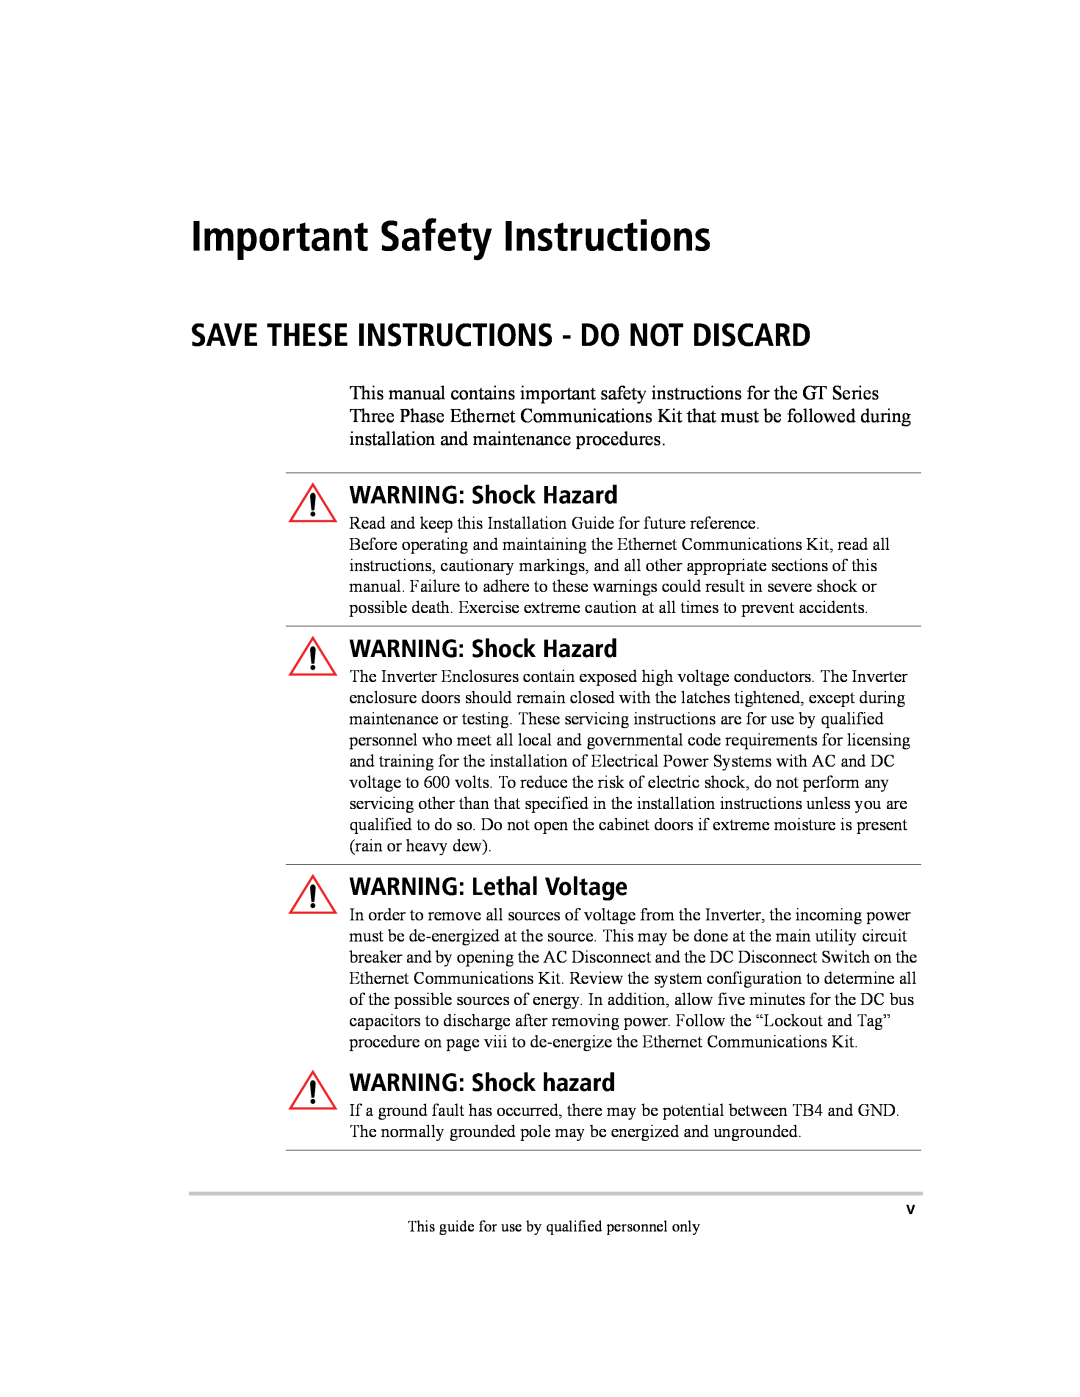 Xantrex Technology GT Series Important Safety Instructions, Save These Instructions - Do Not Discard, WARNING Shock Hazard 